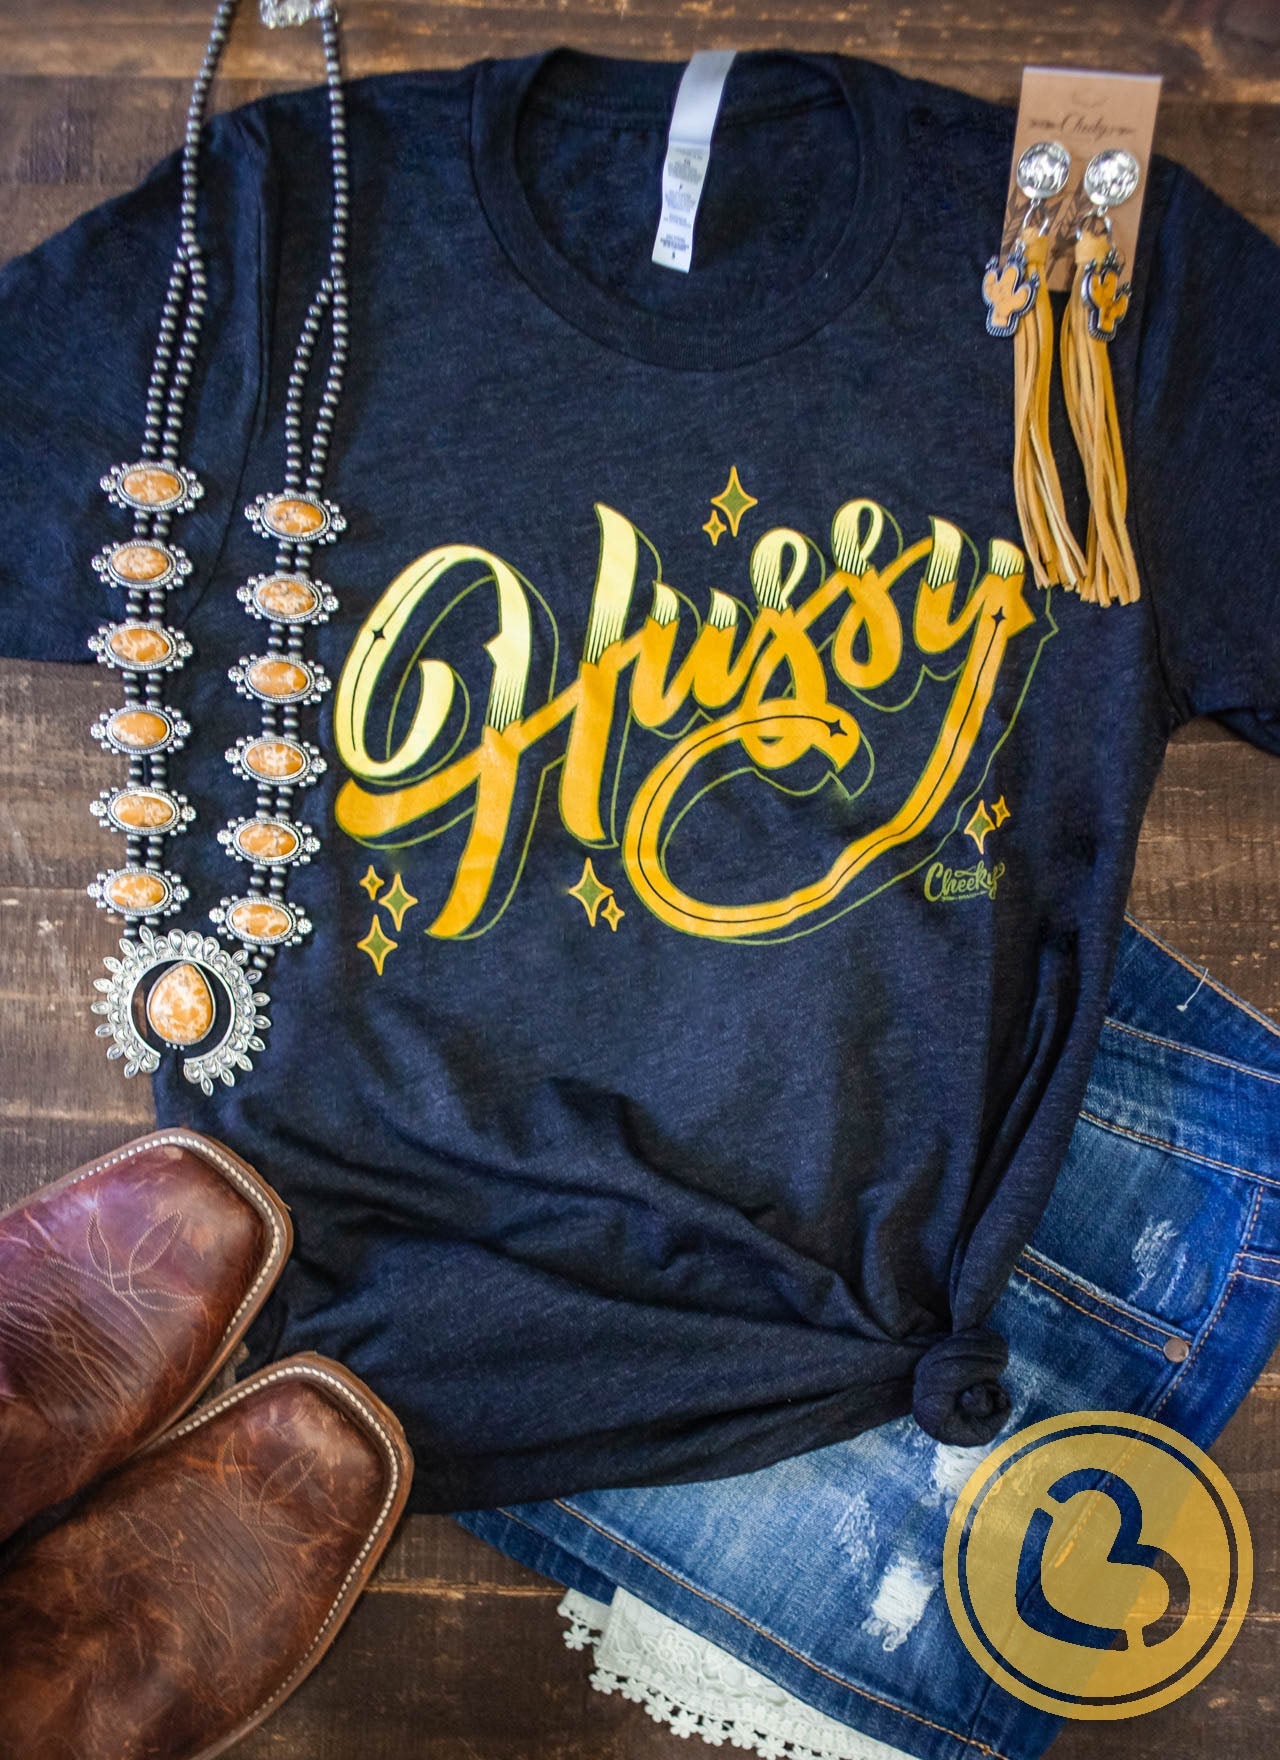 Hussy Unisex Tee with Yellow Print on Vintage Black Cheekys Apparel 41 